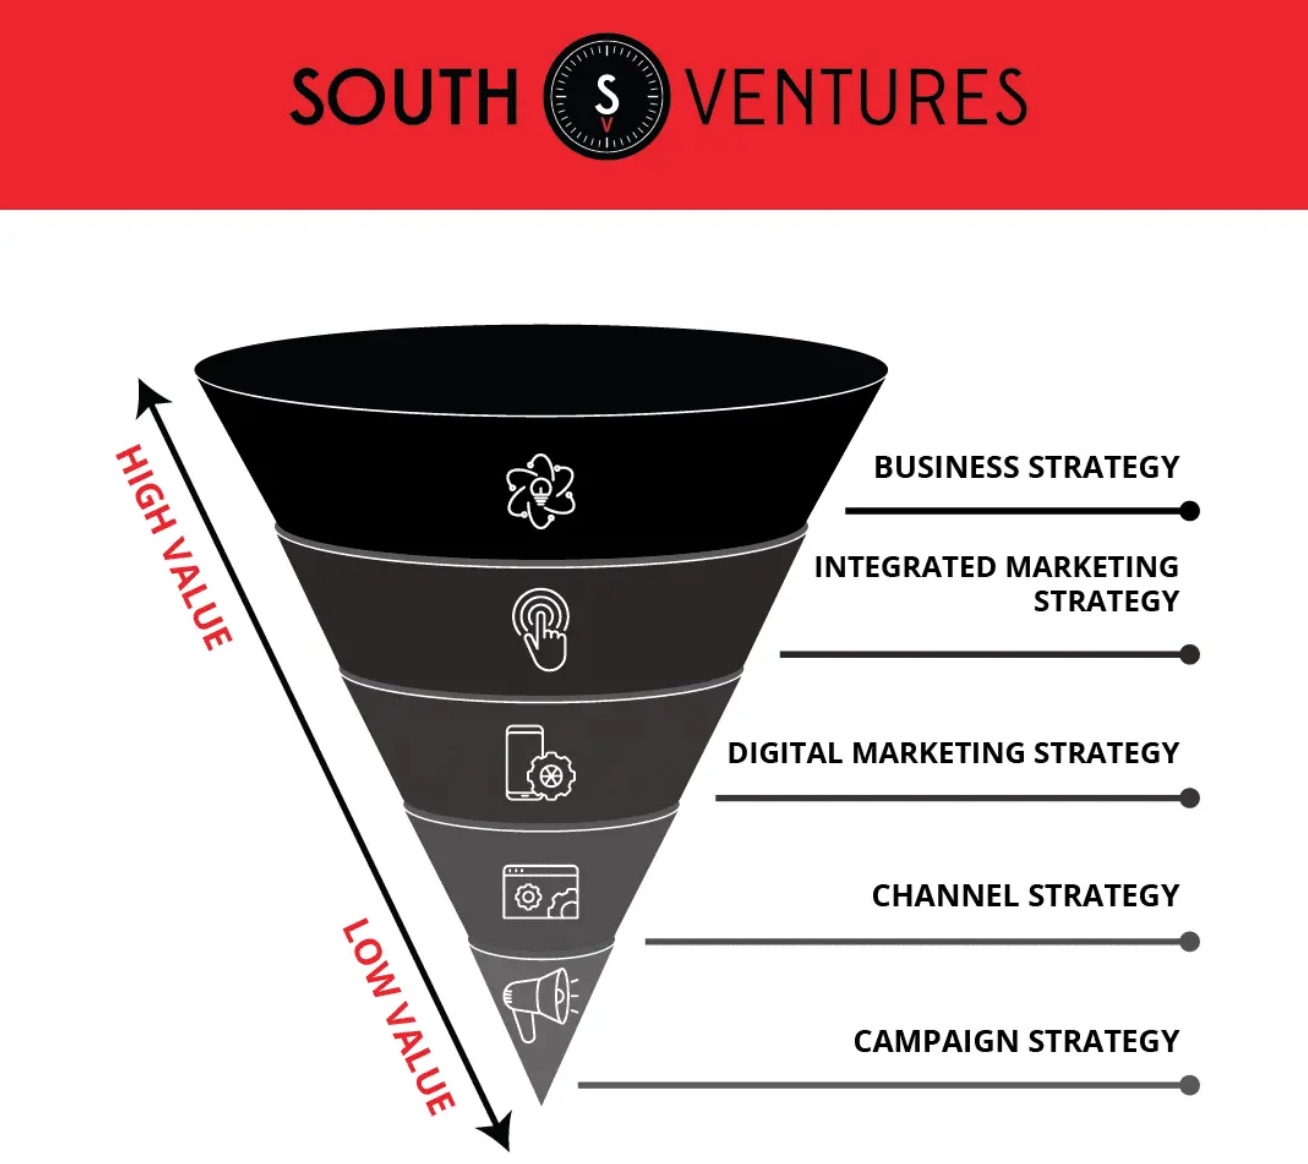 South Ventures Is A Business Consulting And Marketing Firm That Finds Creative And Cost-Effective Solutions To Big Problems